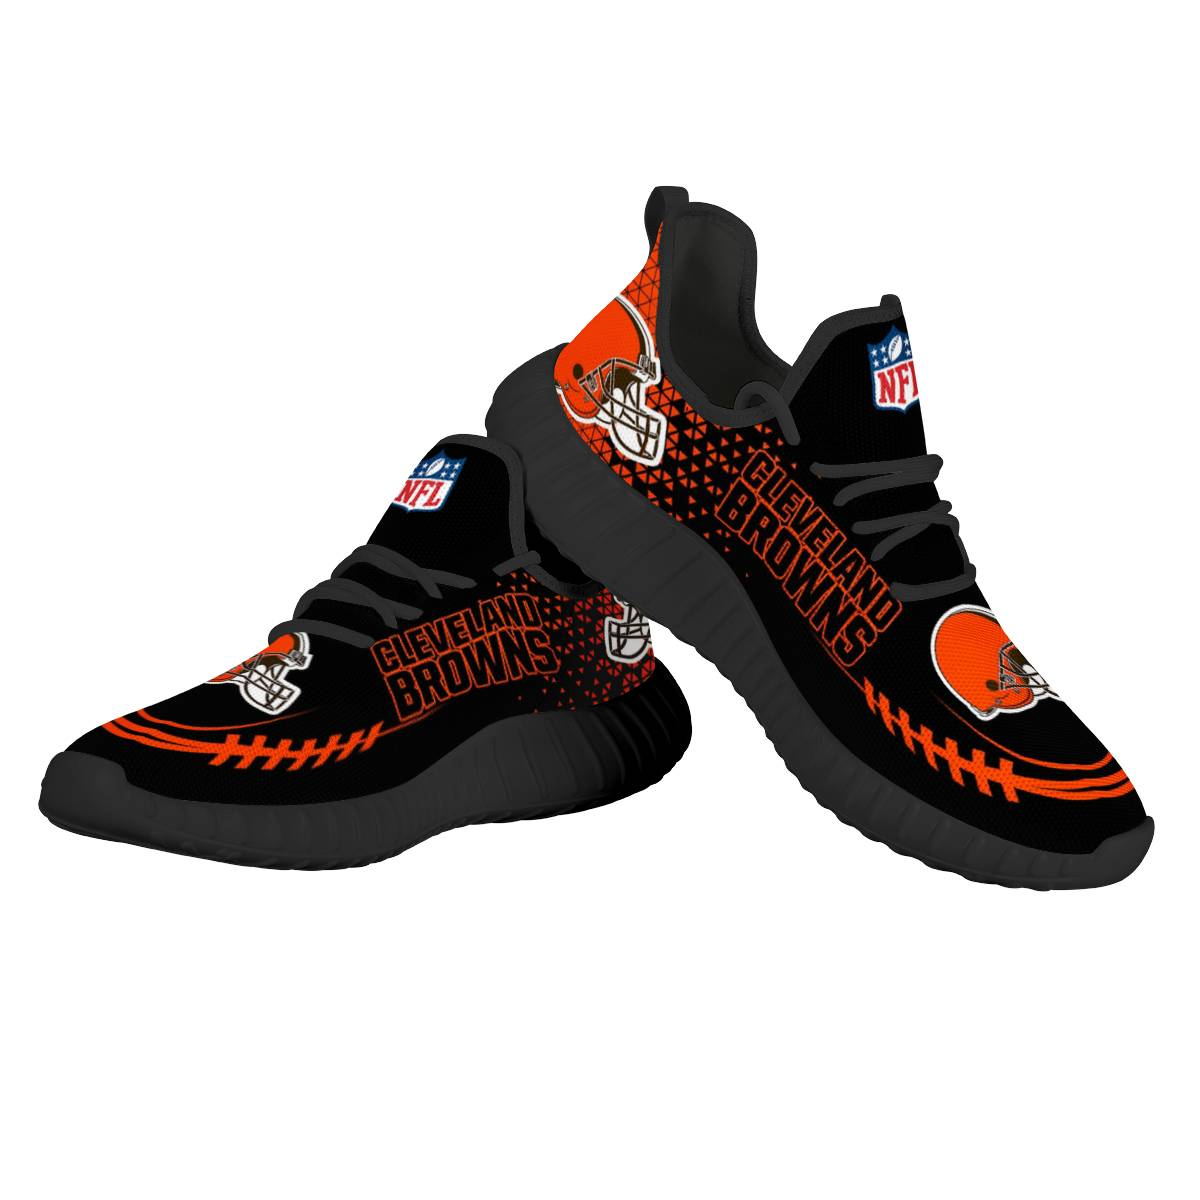 Men's Cleveland Browns Mesh Knit Sneakers/Shoes 009